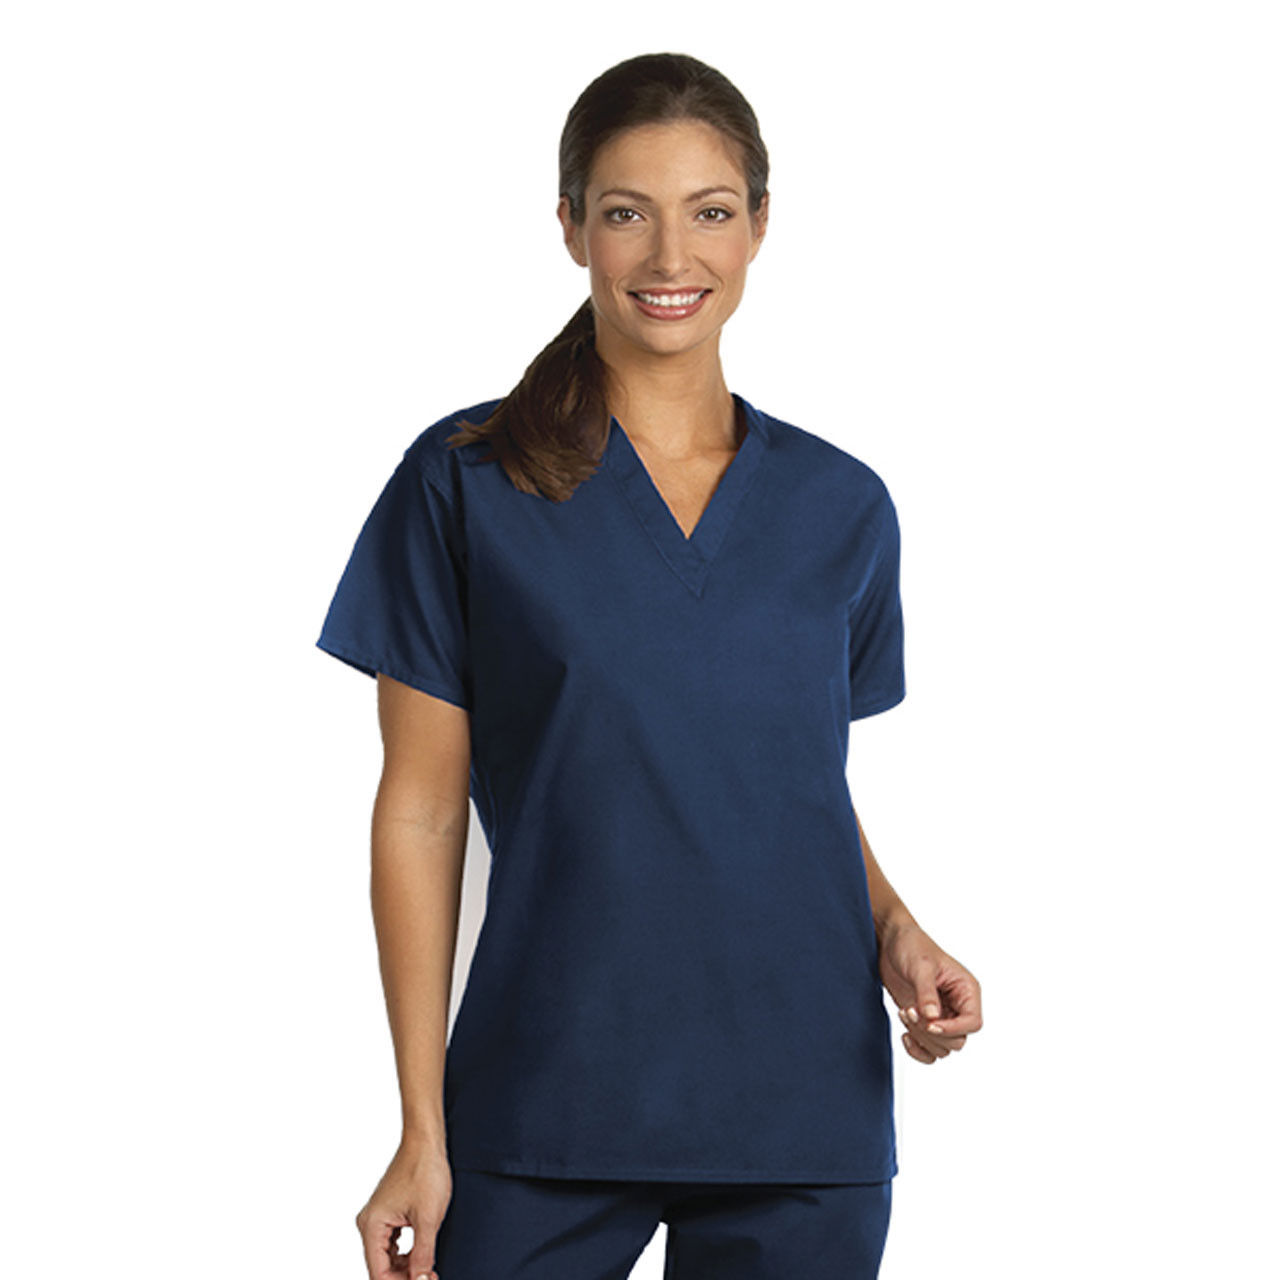 How many navy blue nursing scrubs are in a case?